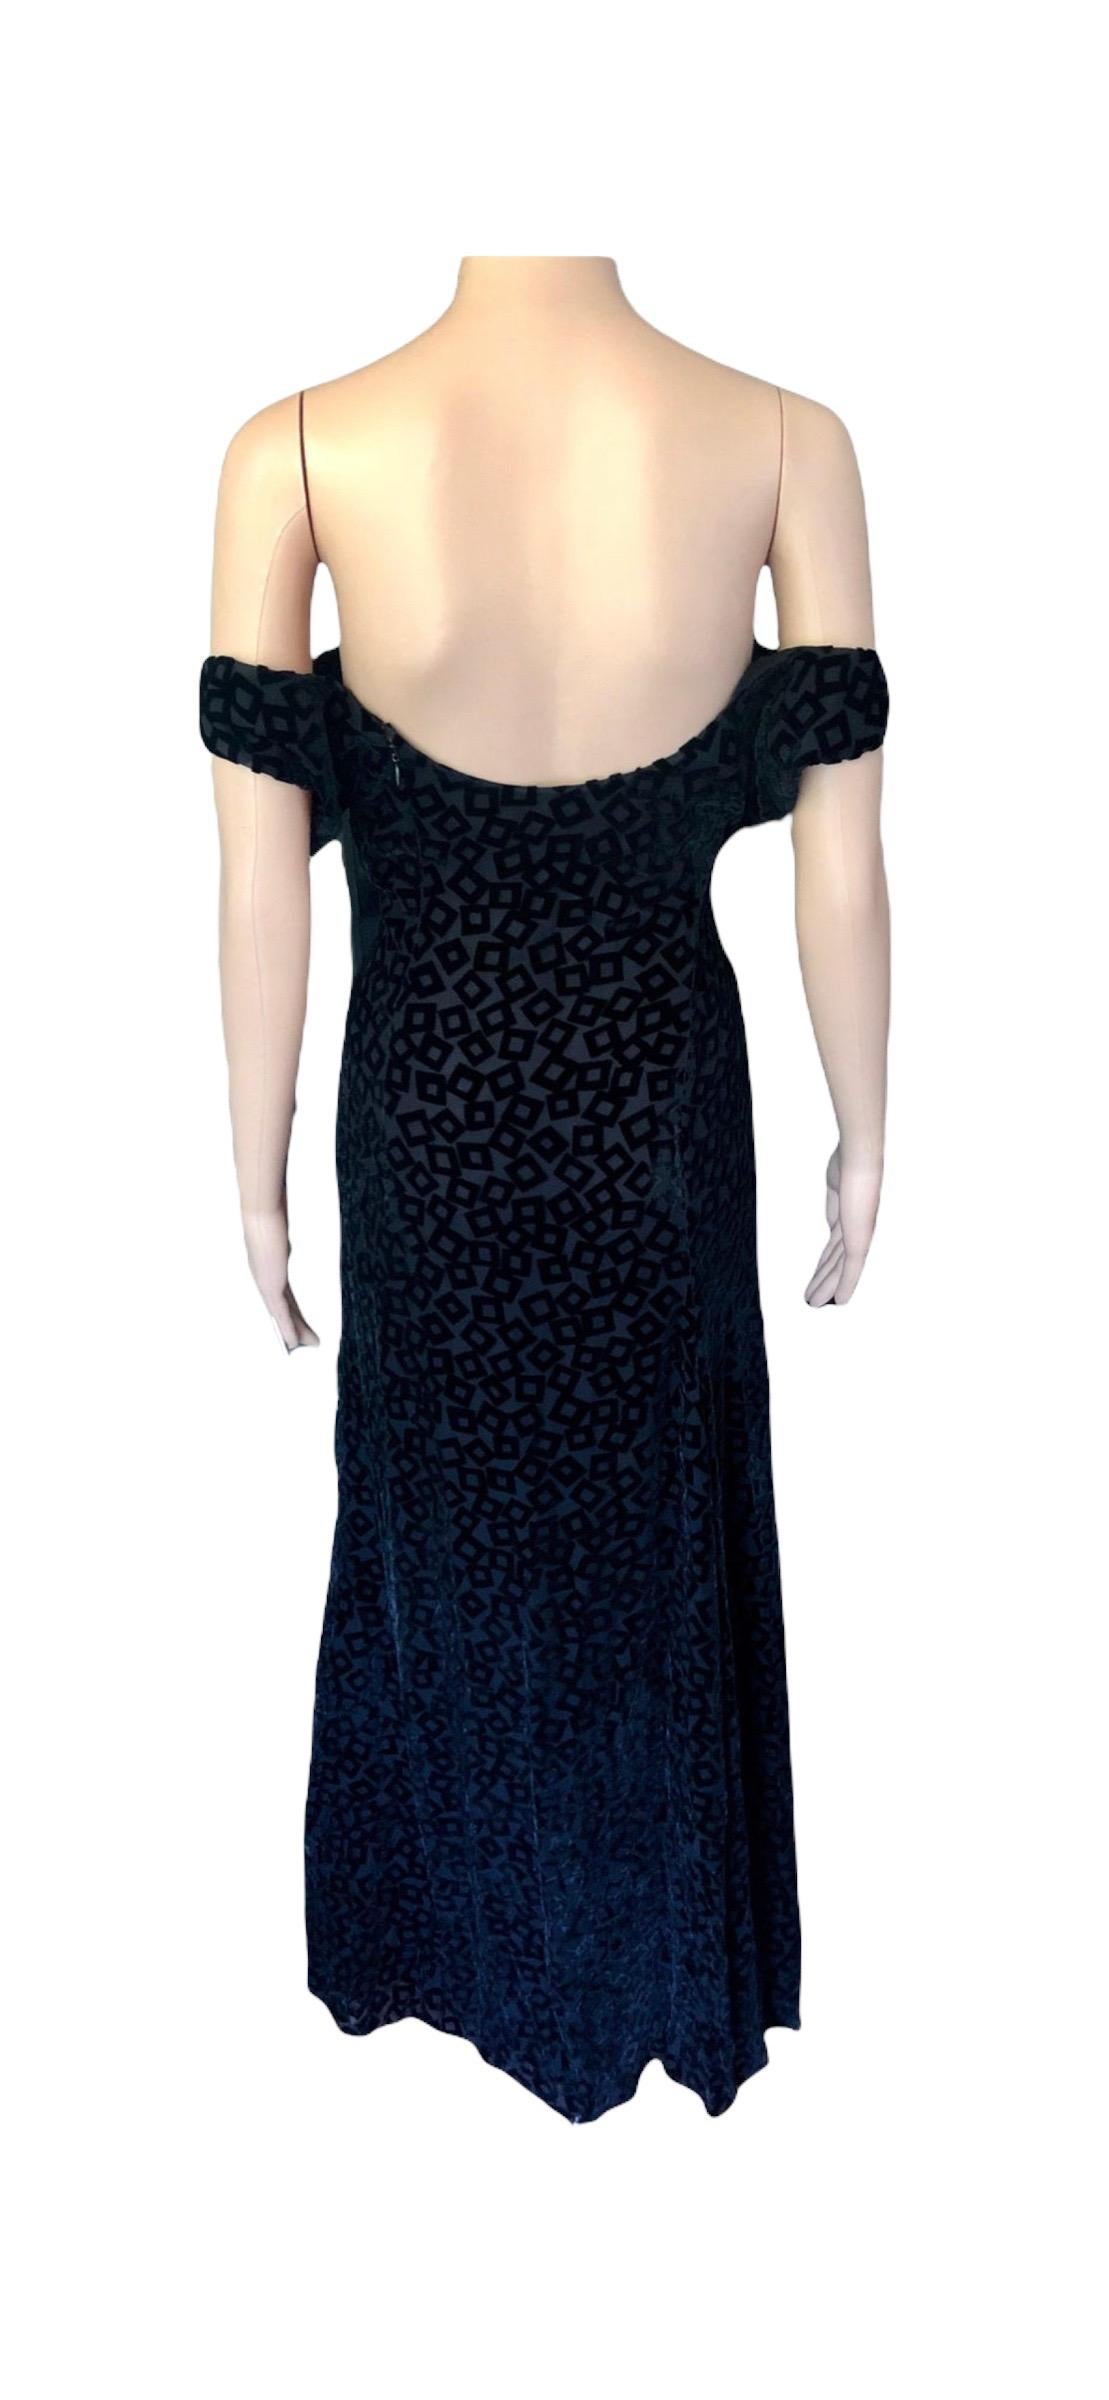 Gianni Versace S/S 1999 Vintage Black Evening Dress Gown For Sale 9